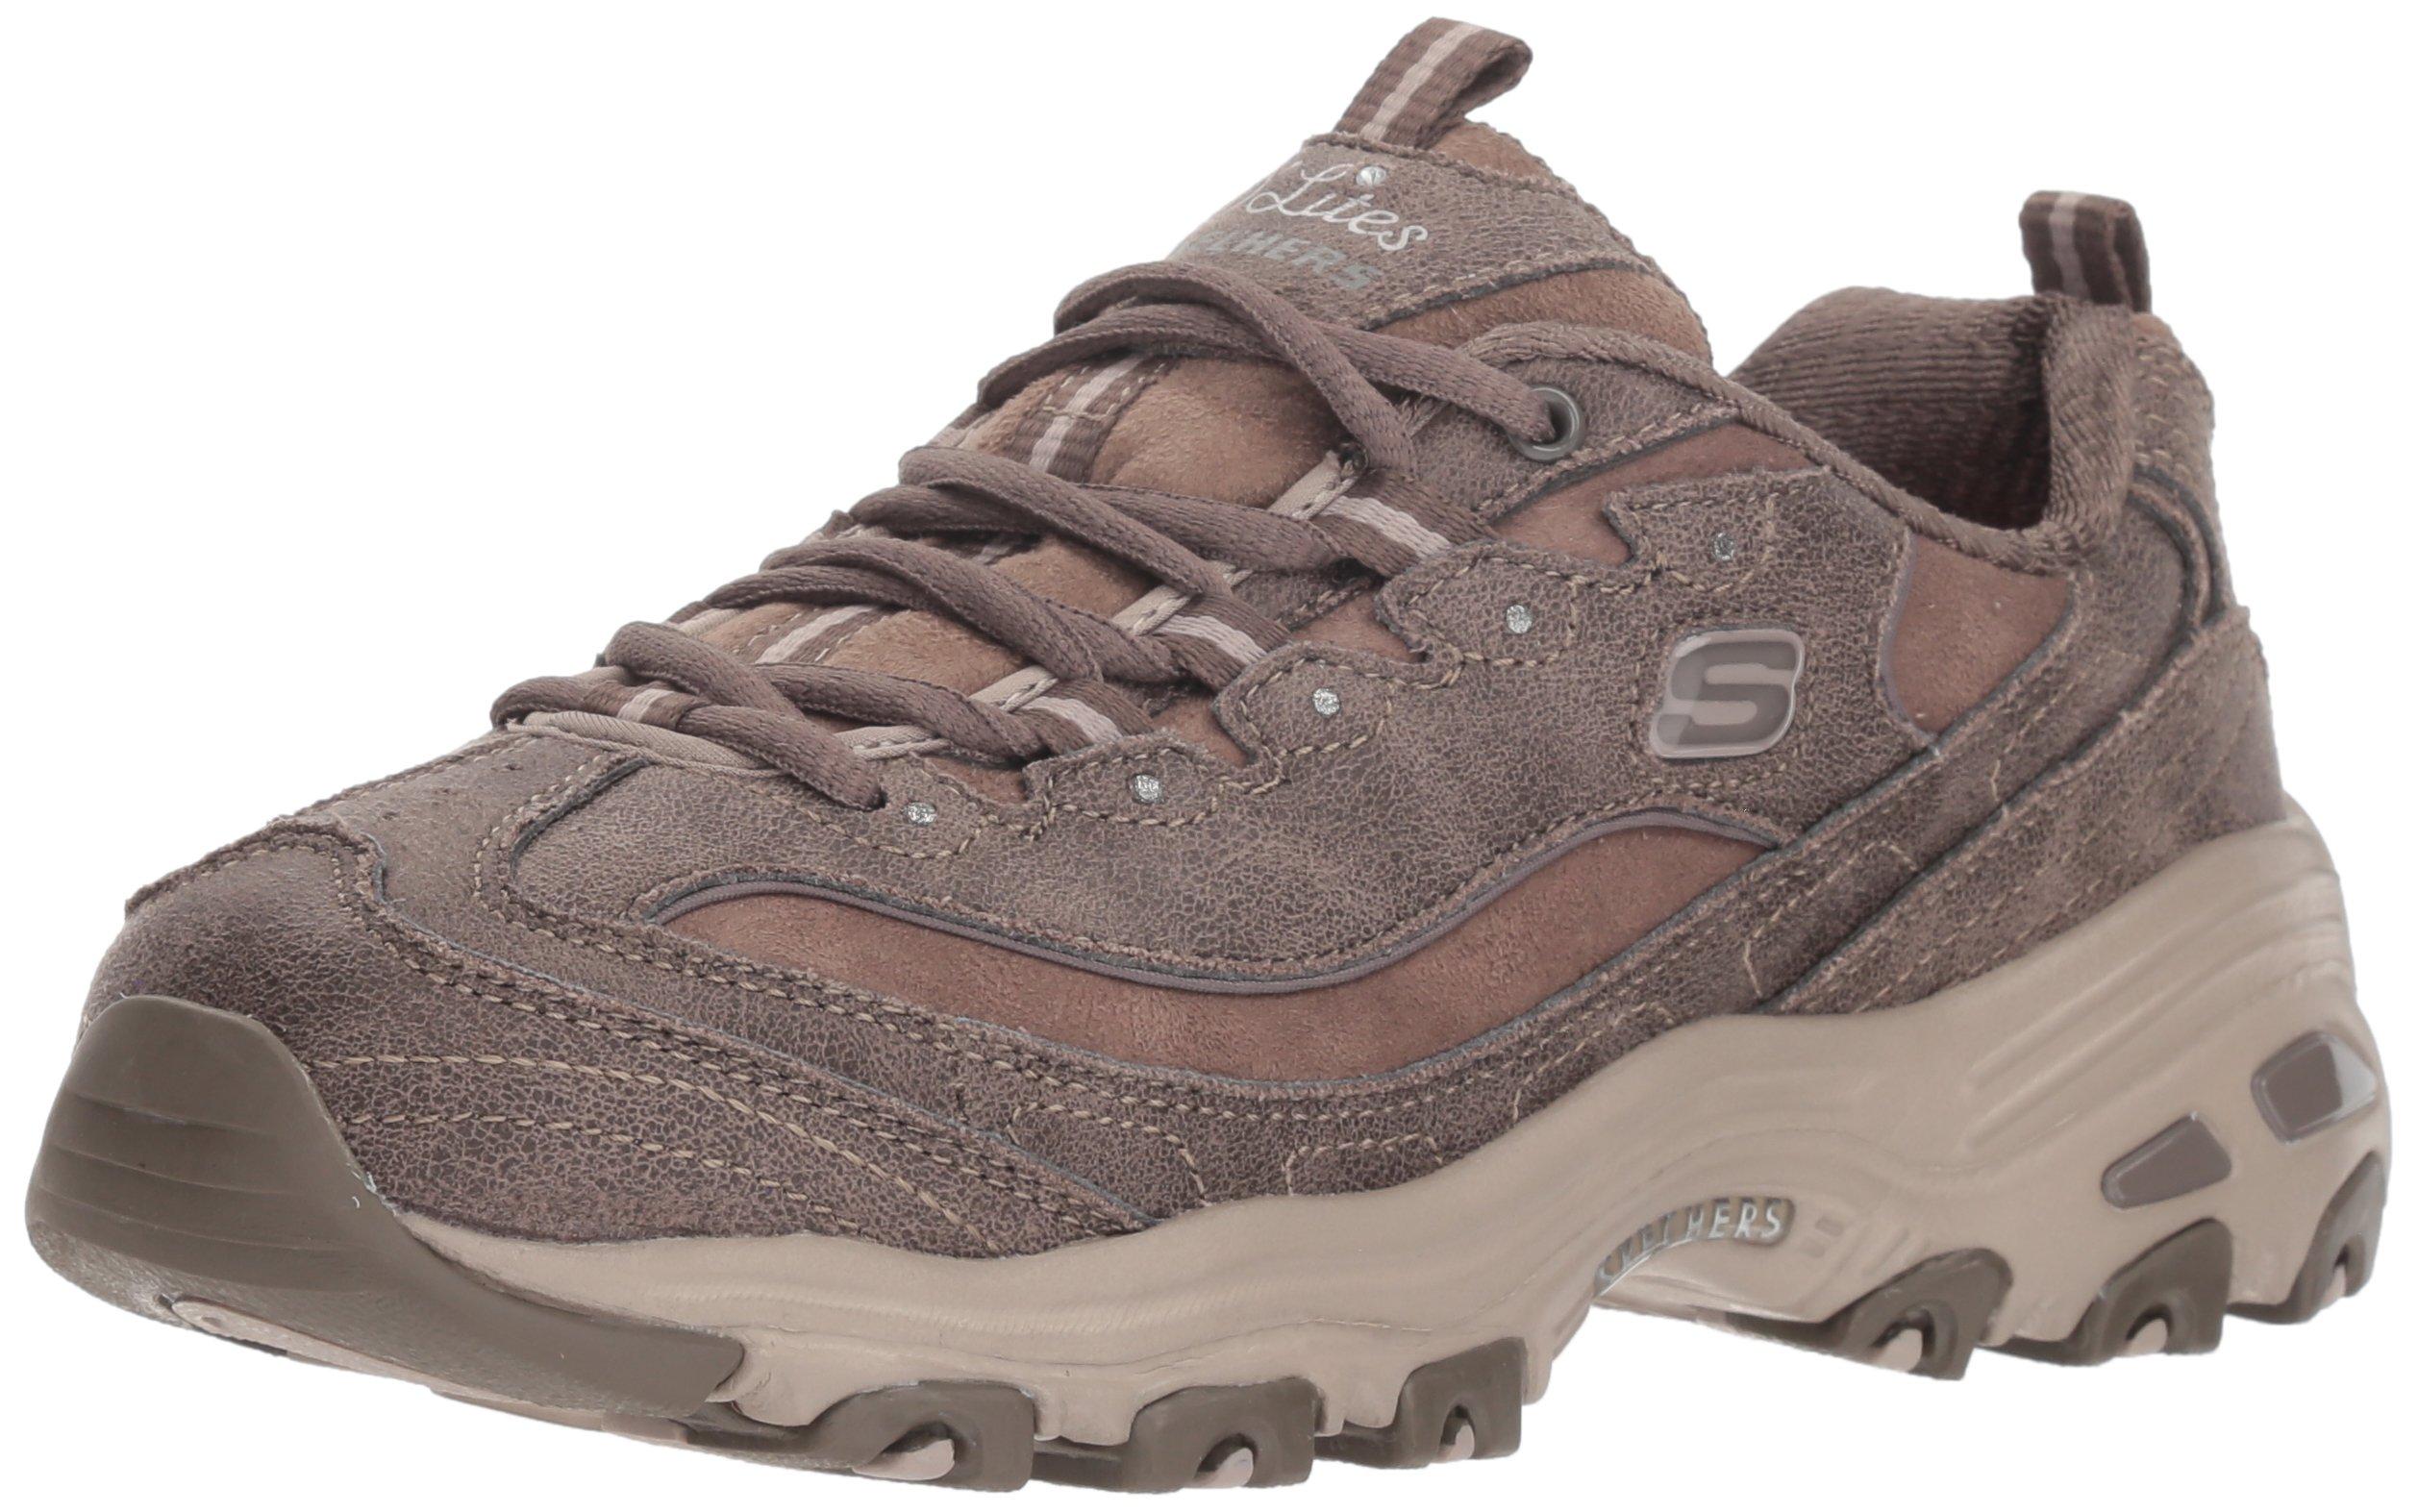 Skechers D'lites New S Trainers Dark Taupe 3 Uk in Brown | Lyst